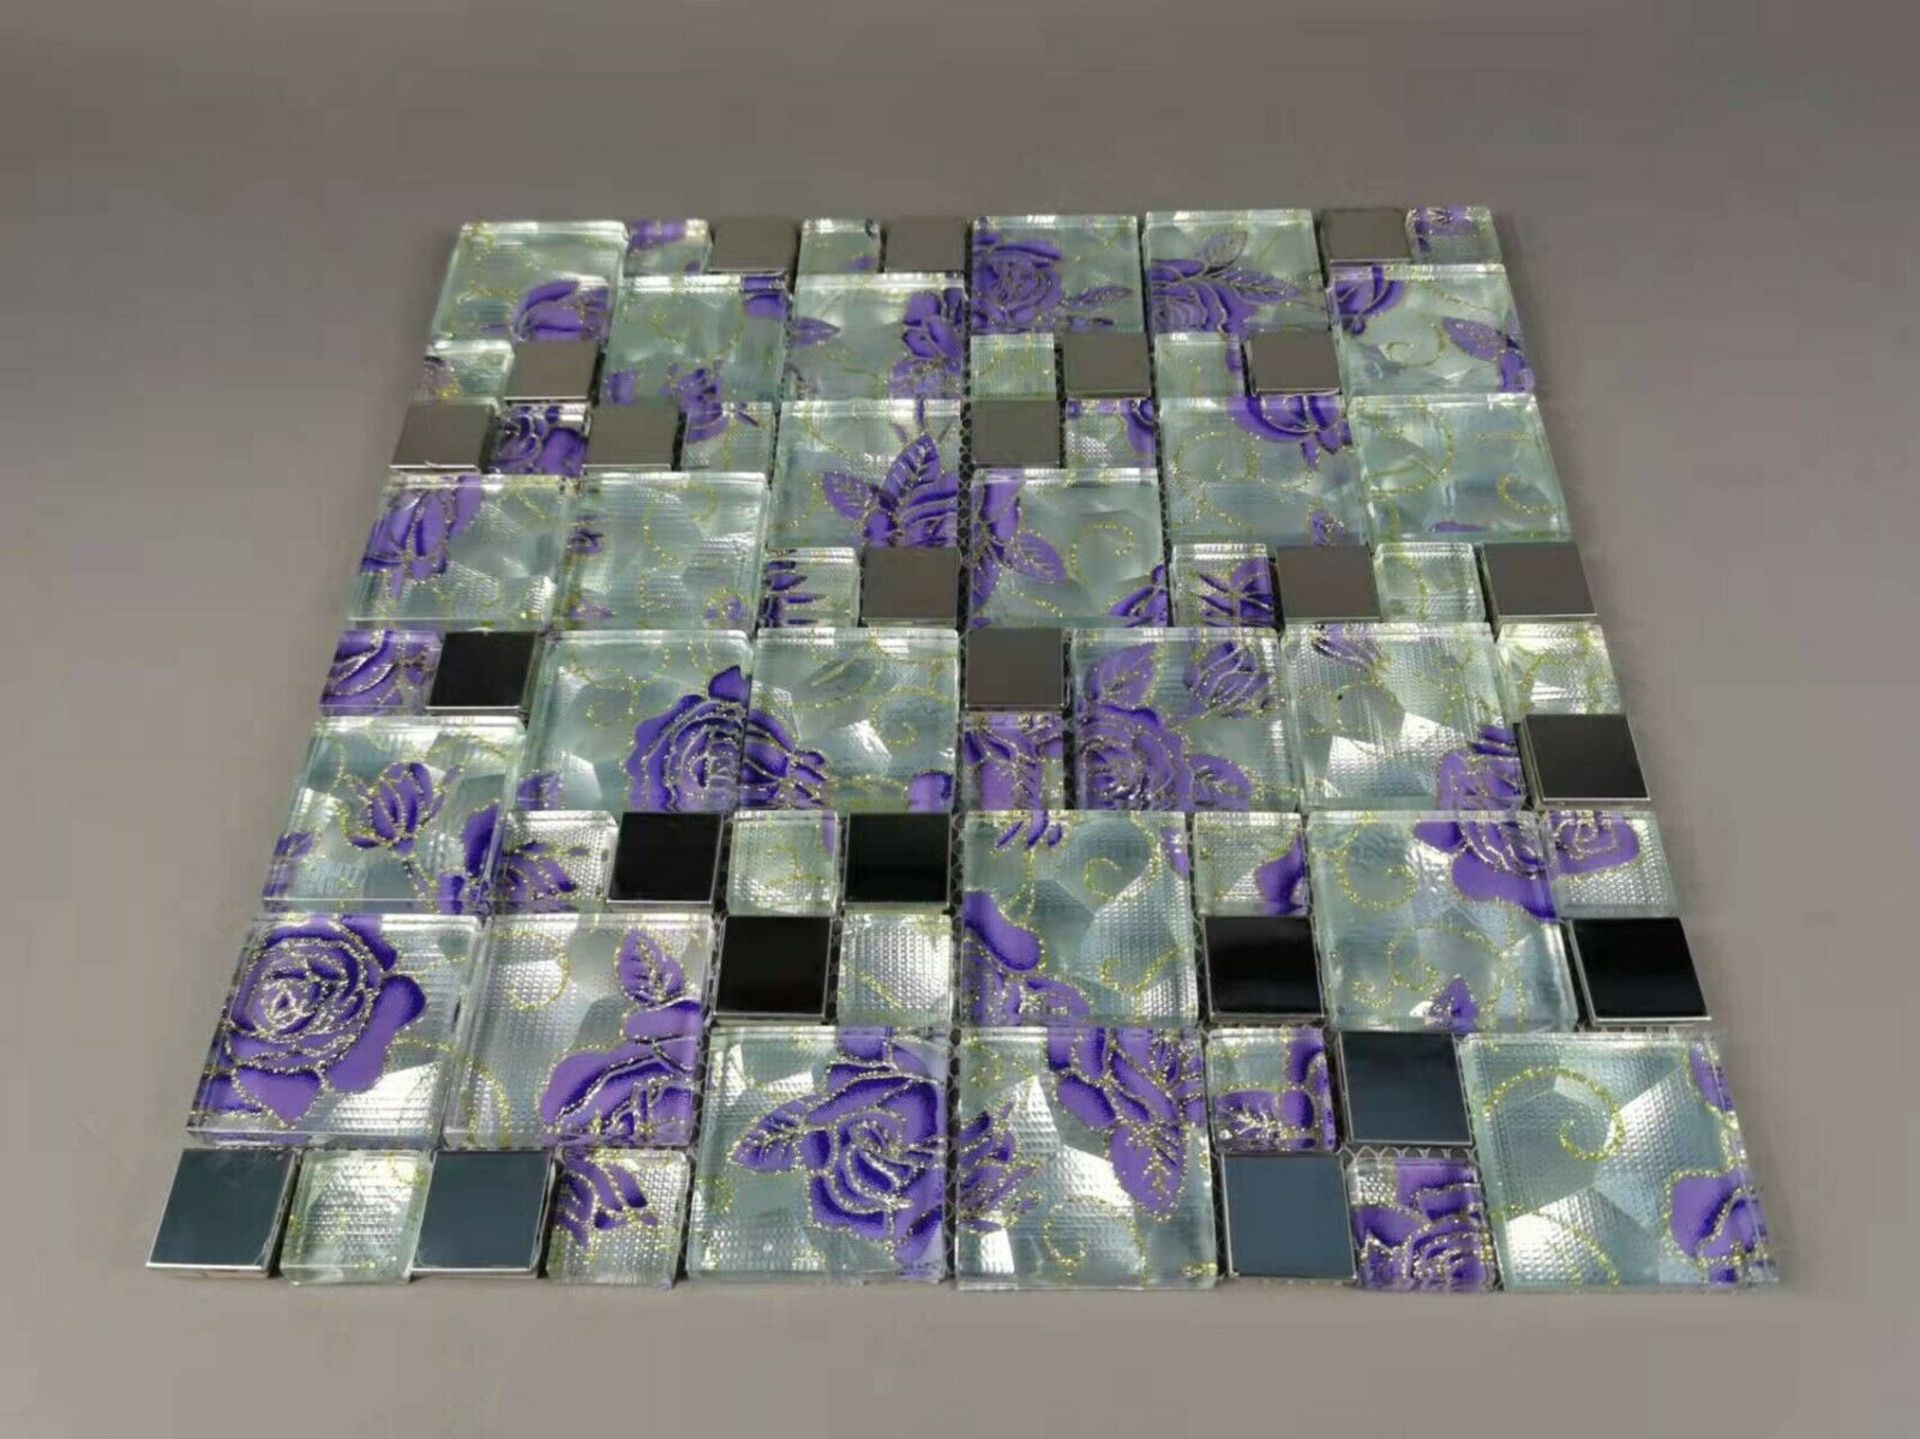 2 Square Metres - High Quality Glass/Stainless Steel Mosaic Tiles - Image 2 of 5